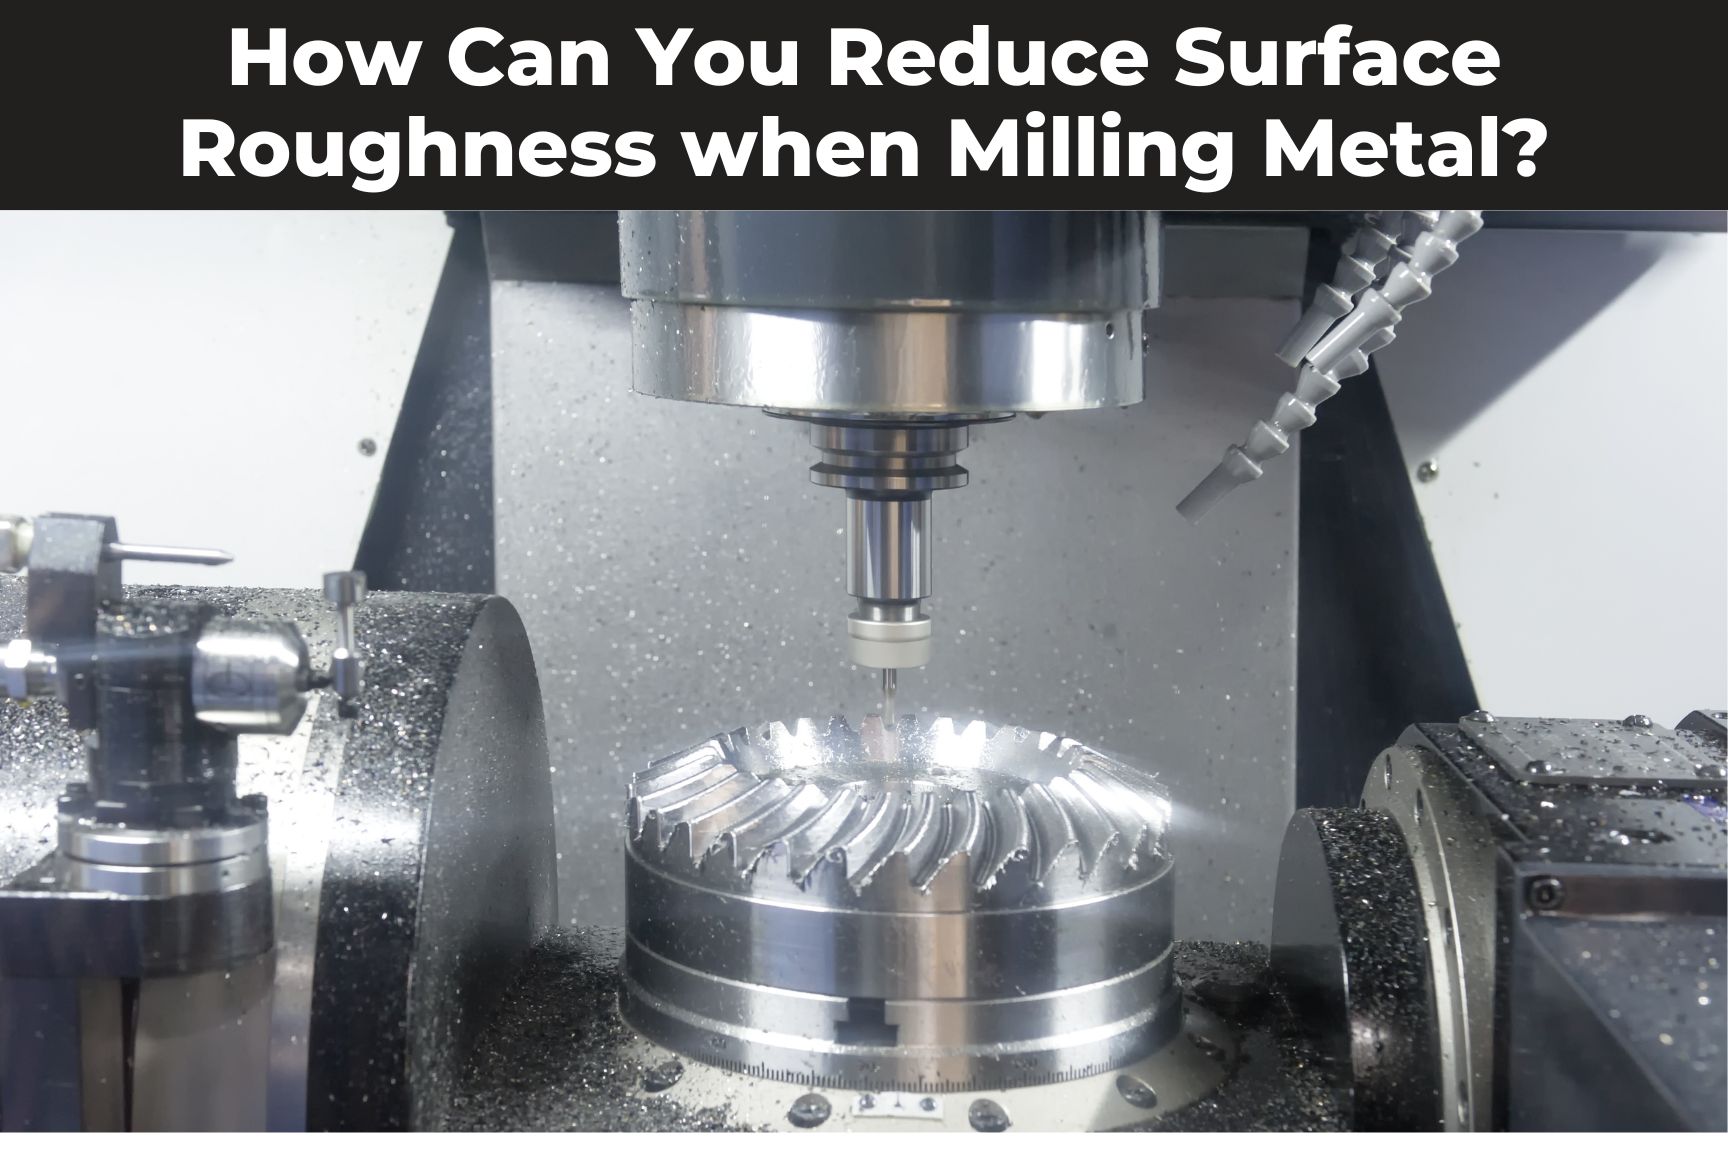 Blog header - How Can You Reduce Surface Roughness when Milling Metal?